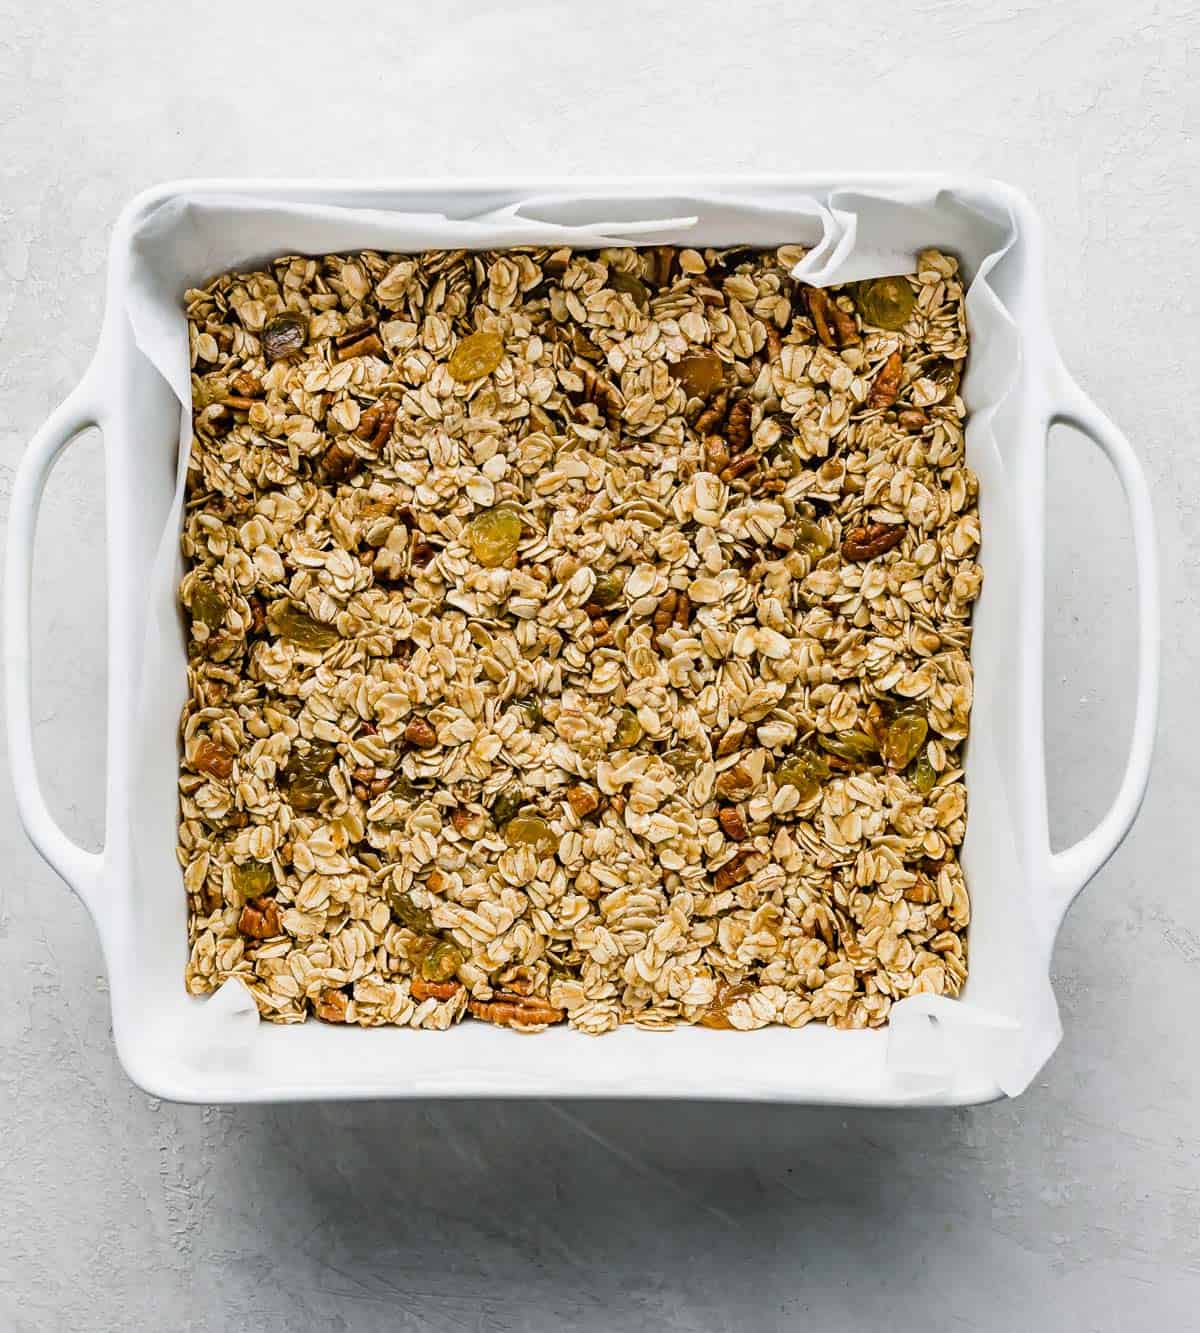 A white square baking dish filled with an Oatmeal Raisin Granola Bar mixture, o na white background.